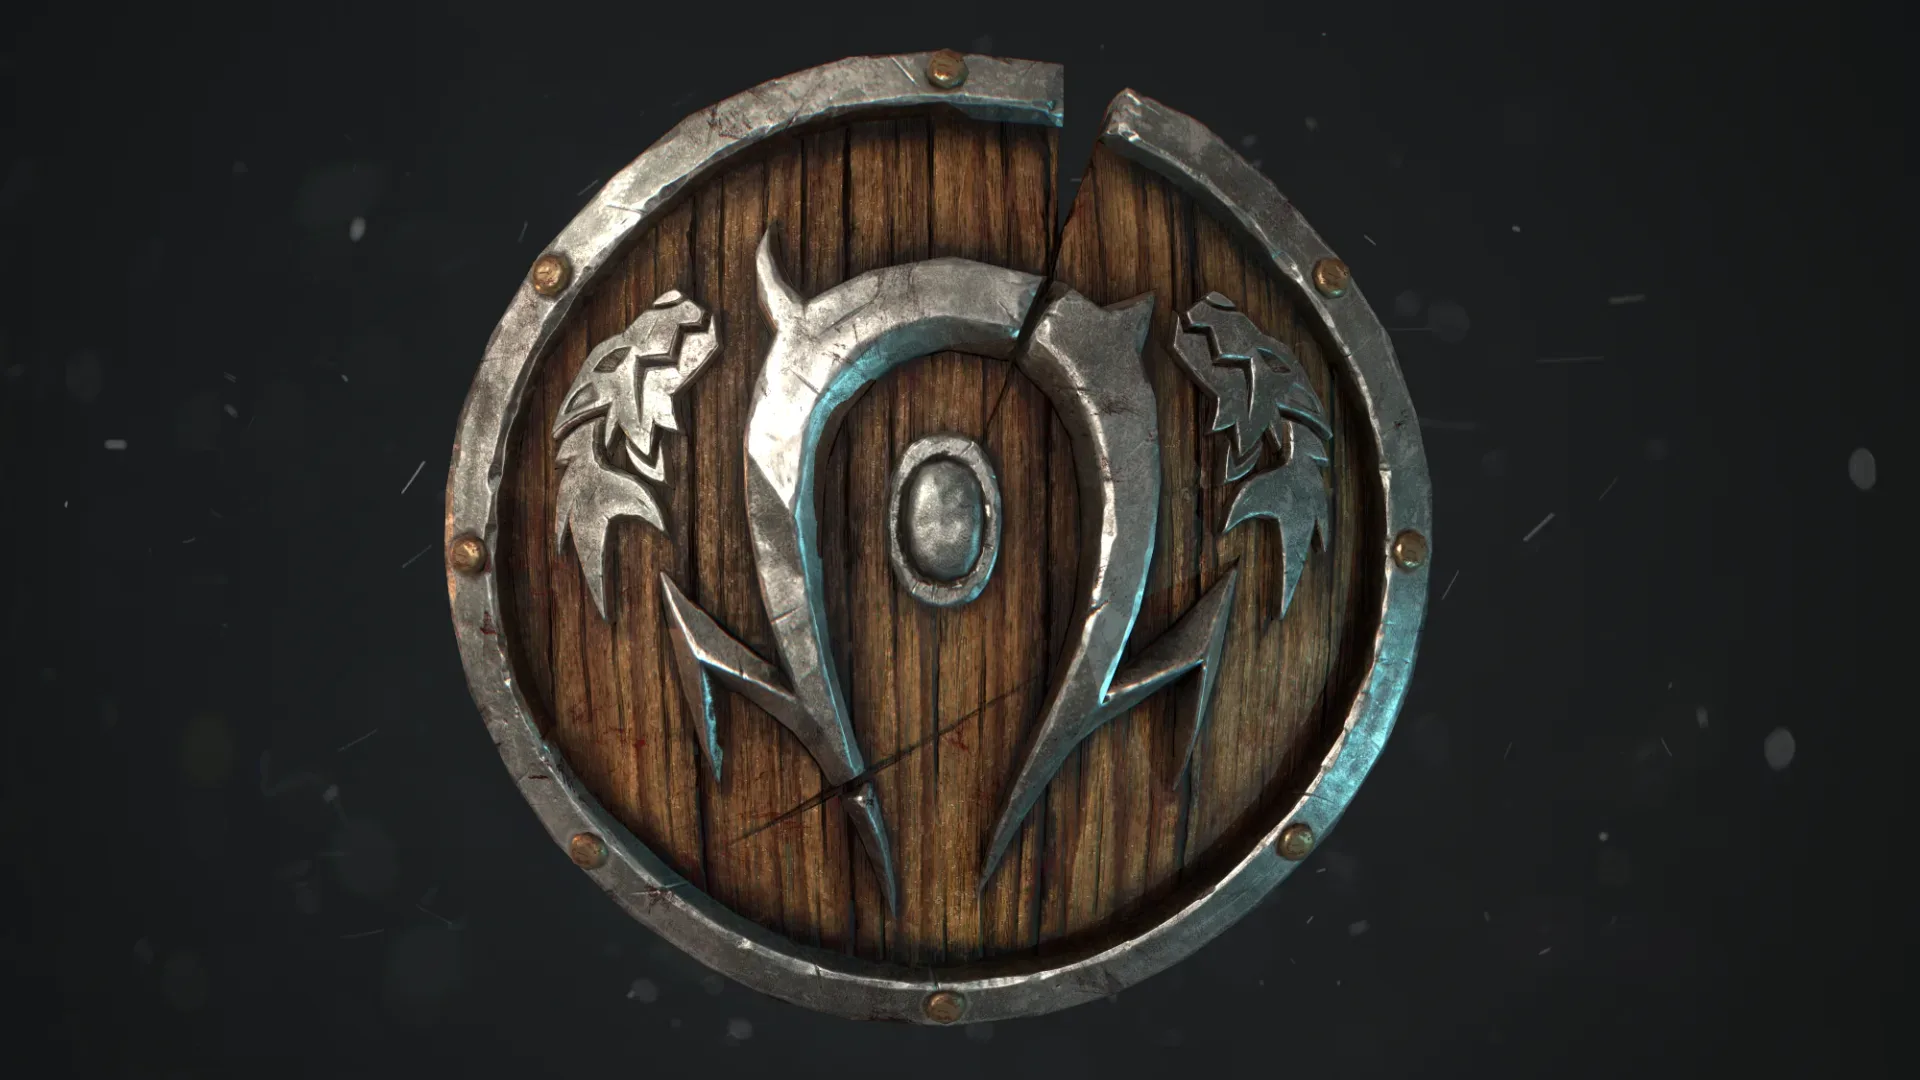 Orc Shield and Axes - World of Warcraft